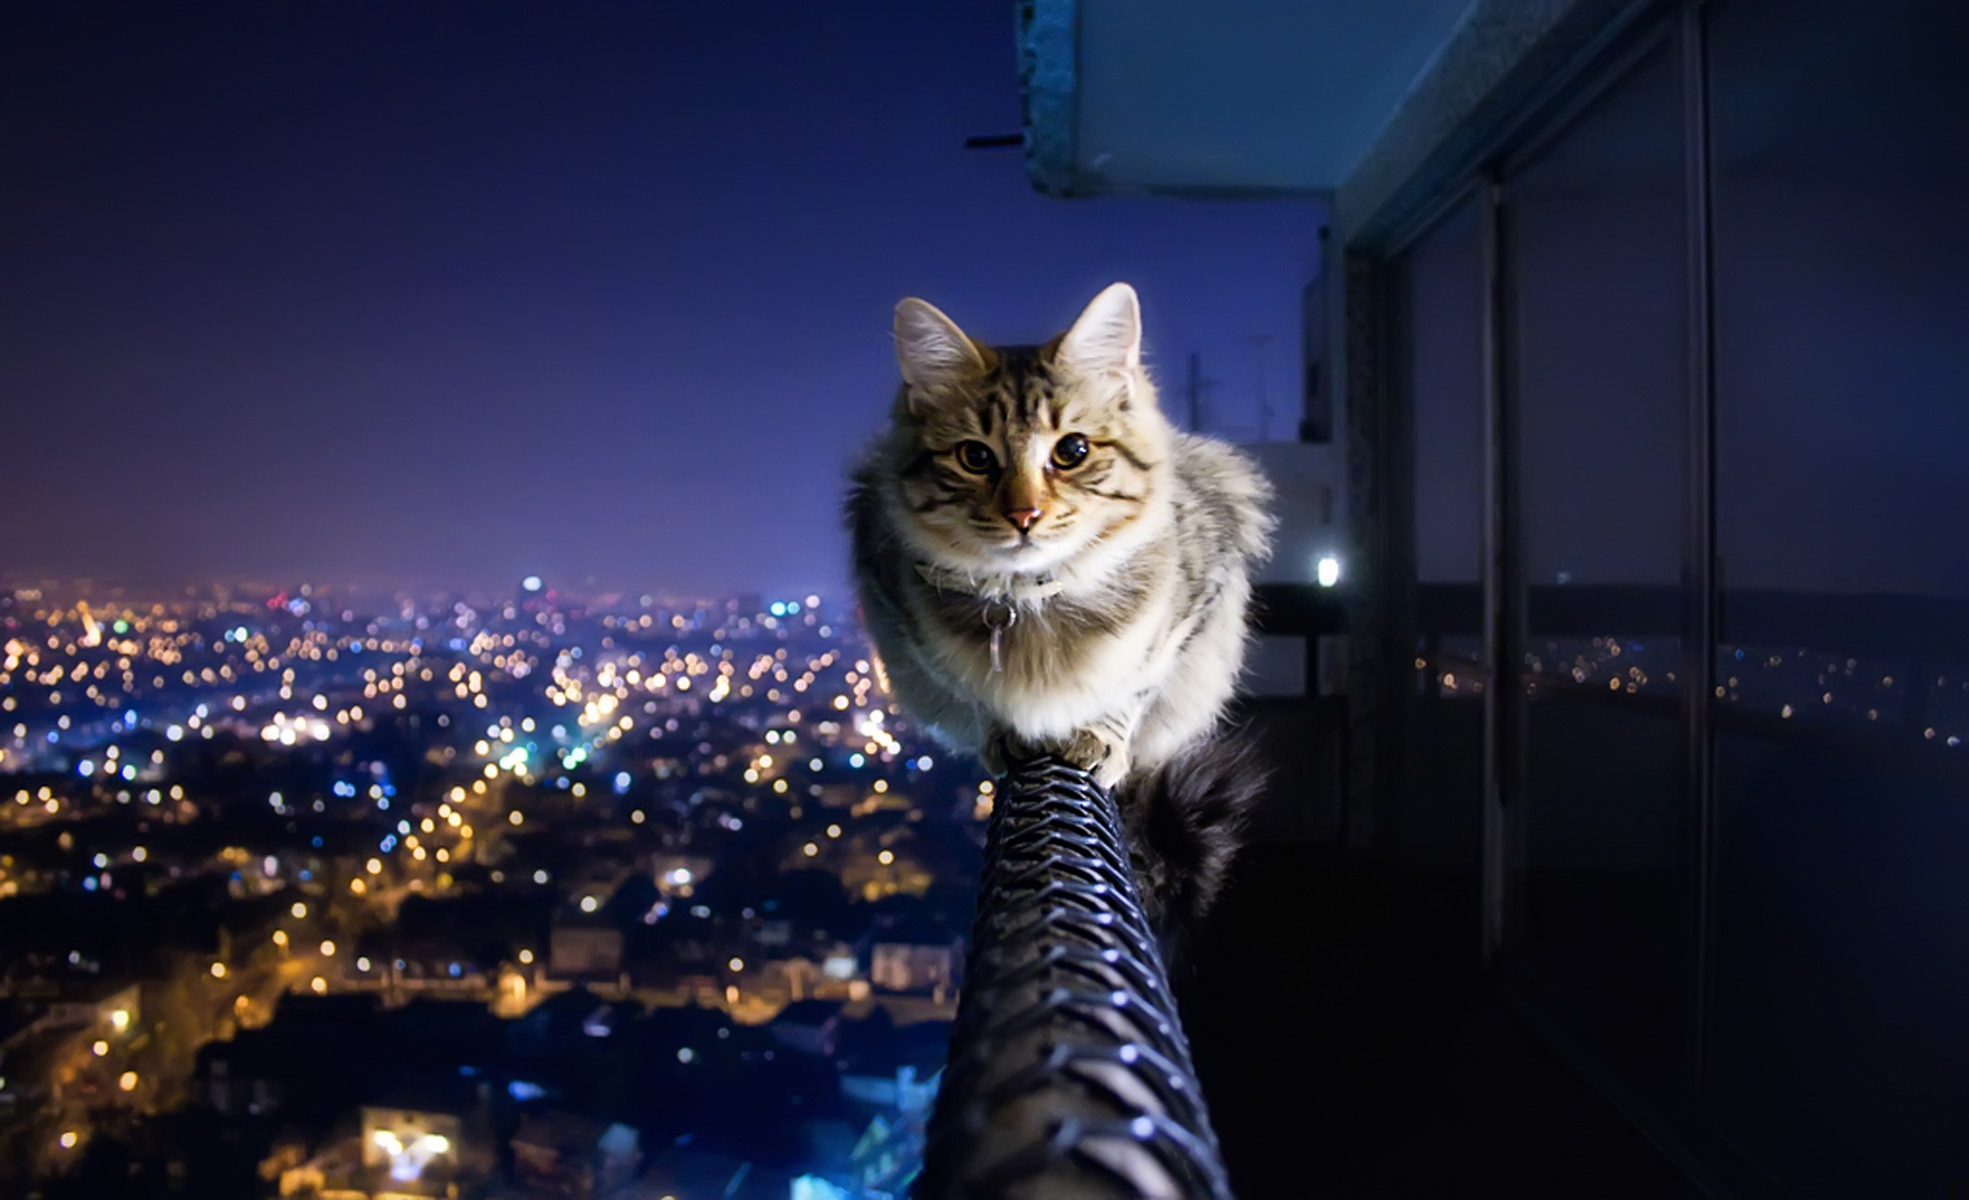 Evening with kitten image